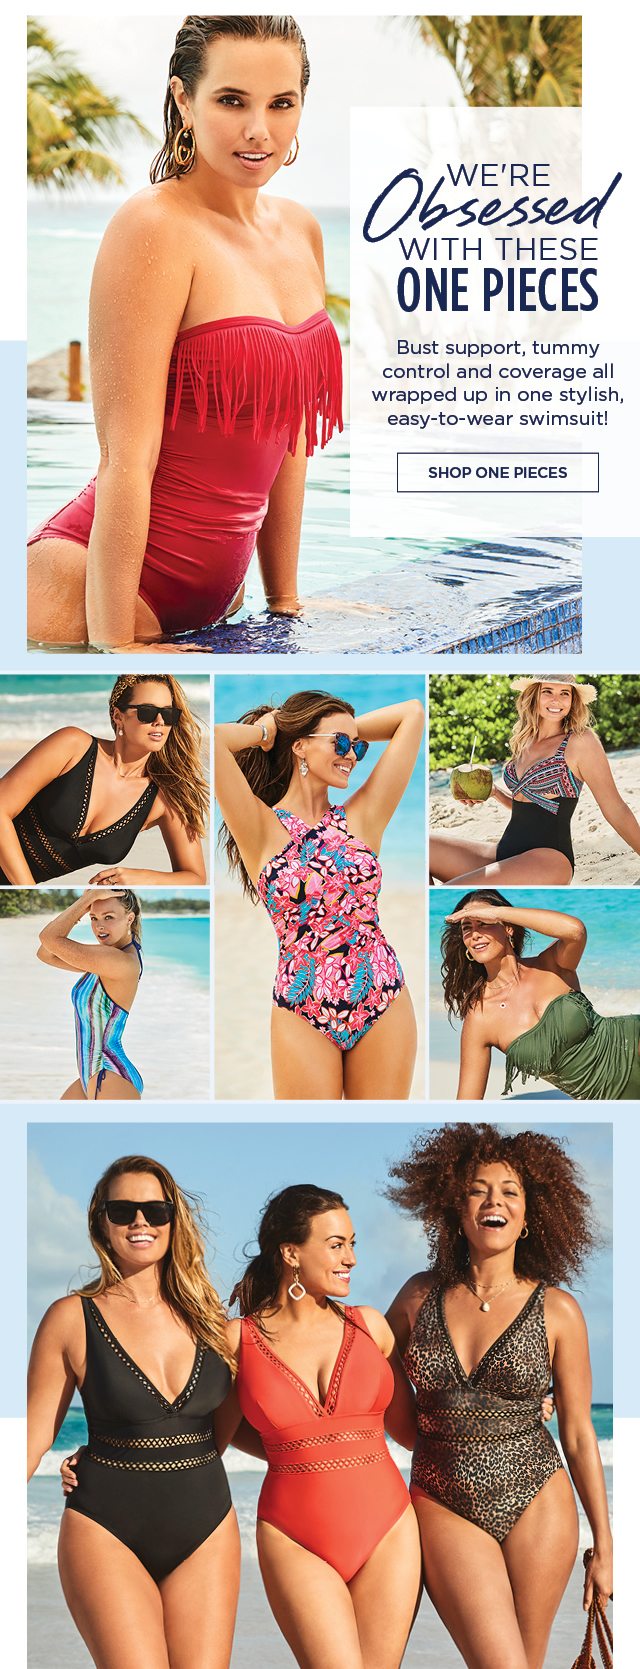 We're Obsessed With These One Pieces